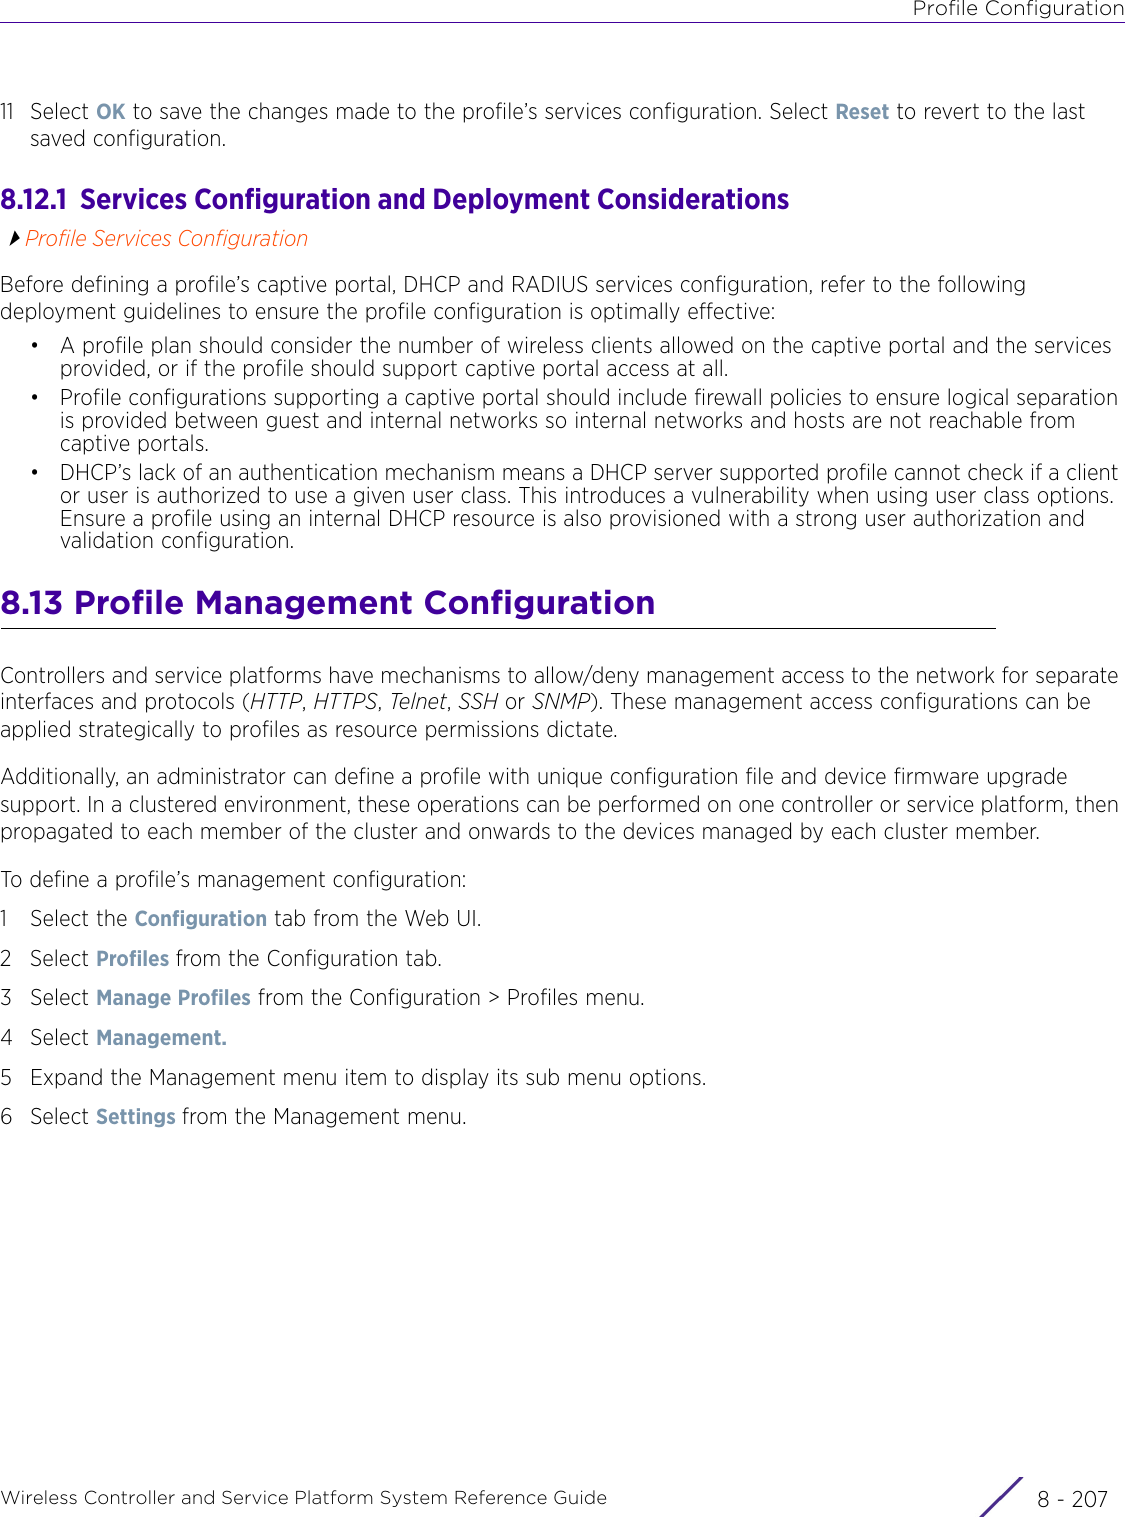 Profile ConfigurationWireless Controller and Service Platform System Reference Guide 8 - 20711 Select OK to save the changes made to the profile’s services configuration. Select Reset to revert to the last saved configuration.8.12.1  Services Configuration and Deployment ConsiderationsProfile Services ConfigurationBefore defining a profile’s captive portal, DHCP and RADIUS services configuration, refer to the following deployment guidelines to ensure the profile configuration is optimally effective: • A profile plan should consider the number of wireless clients allowed on the captive portal and the services provided, or if the profile should support captive portal access at all.• Profile configurations supporting a captive portal should include firewall policies to ensure logical separation is provided between guest and internal networks so internal networks and hosts are not reachable from captive portals.• DHCP’s lack of an authentication mechanism means a DHCP server supported profile cannot check if a client or user is authorized to use a given user class. This introduces a vulnerability when using user class options. Ensure a profile using an internal DHCP resource is also provisioned with a strong user authorization and validation configuration.8.13 Profile Management ConfigurationControllers and service platforms have mechanisms to allow/deny management access to the network for separate interfaces and protocols (HTTP, HTTPS, Telnet, SSH or SNMP). These management access configurations can be applied strategically to profiles as resource permissions dictate. Additionally, an administrator can define a profile with unique configuration file and device firmware upgrade support. In a clustered environment, these operations can be performed on one controller or service platform, then propagated to each member of the cluster and onwards to the devices managed by each cluster member.To define a profile’s management configuration:1 Select the Configuration tab from the Web UI.2Select Profiles from the Configuration tab.3Select Manage Profiles from the Configuration &gt; Profiles menu.4Select Management.5 Expand the Management menu item to display its sub menu options.6Select Settings from the Management menu.